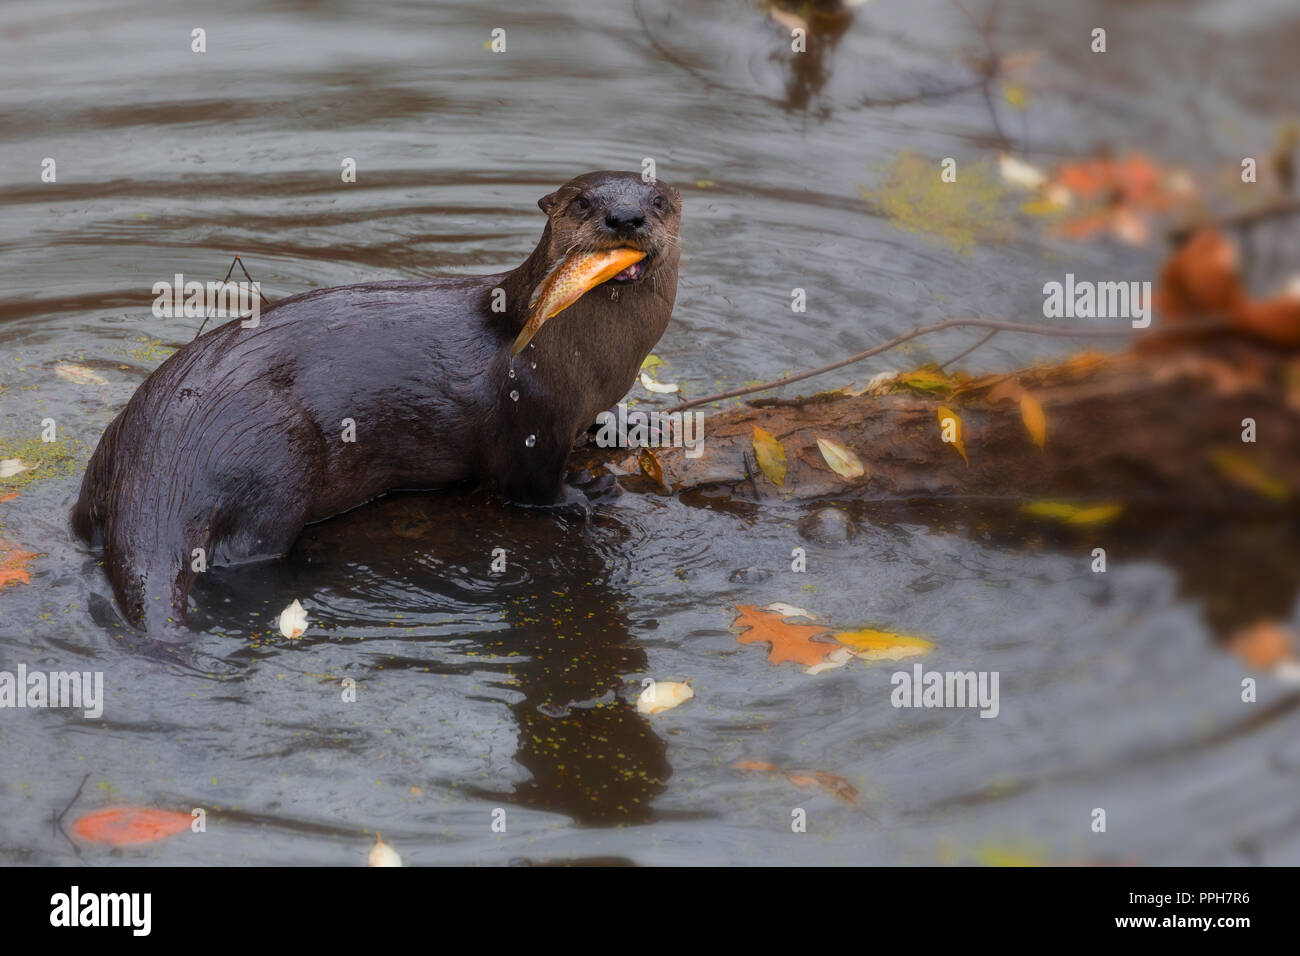 A North American River Otter shows off his catch of a pumpkinseed fish on a log in Storm Creek at the Muscatatuck National Wildlife Refuge. Stock Photo